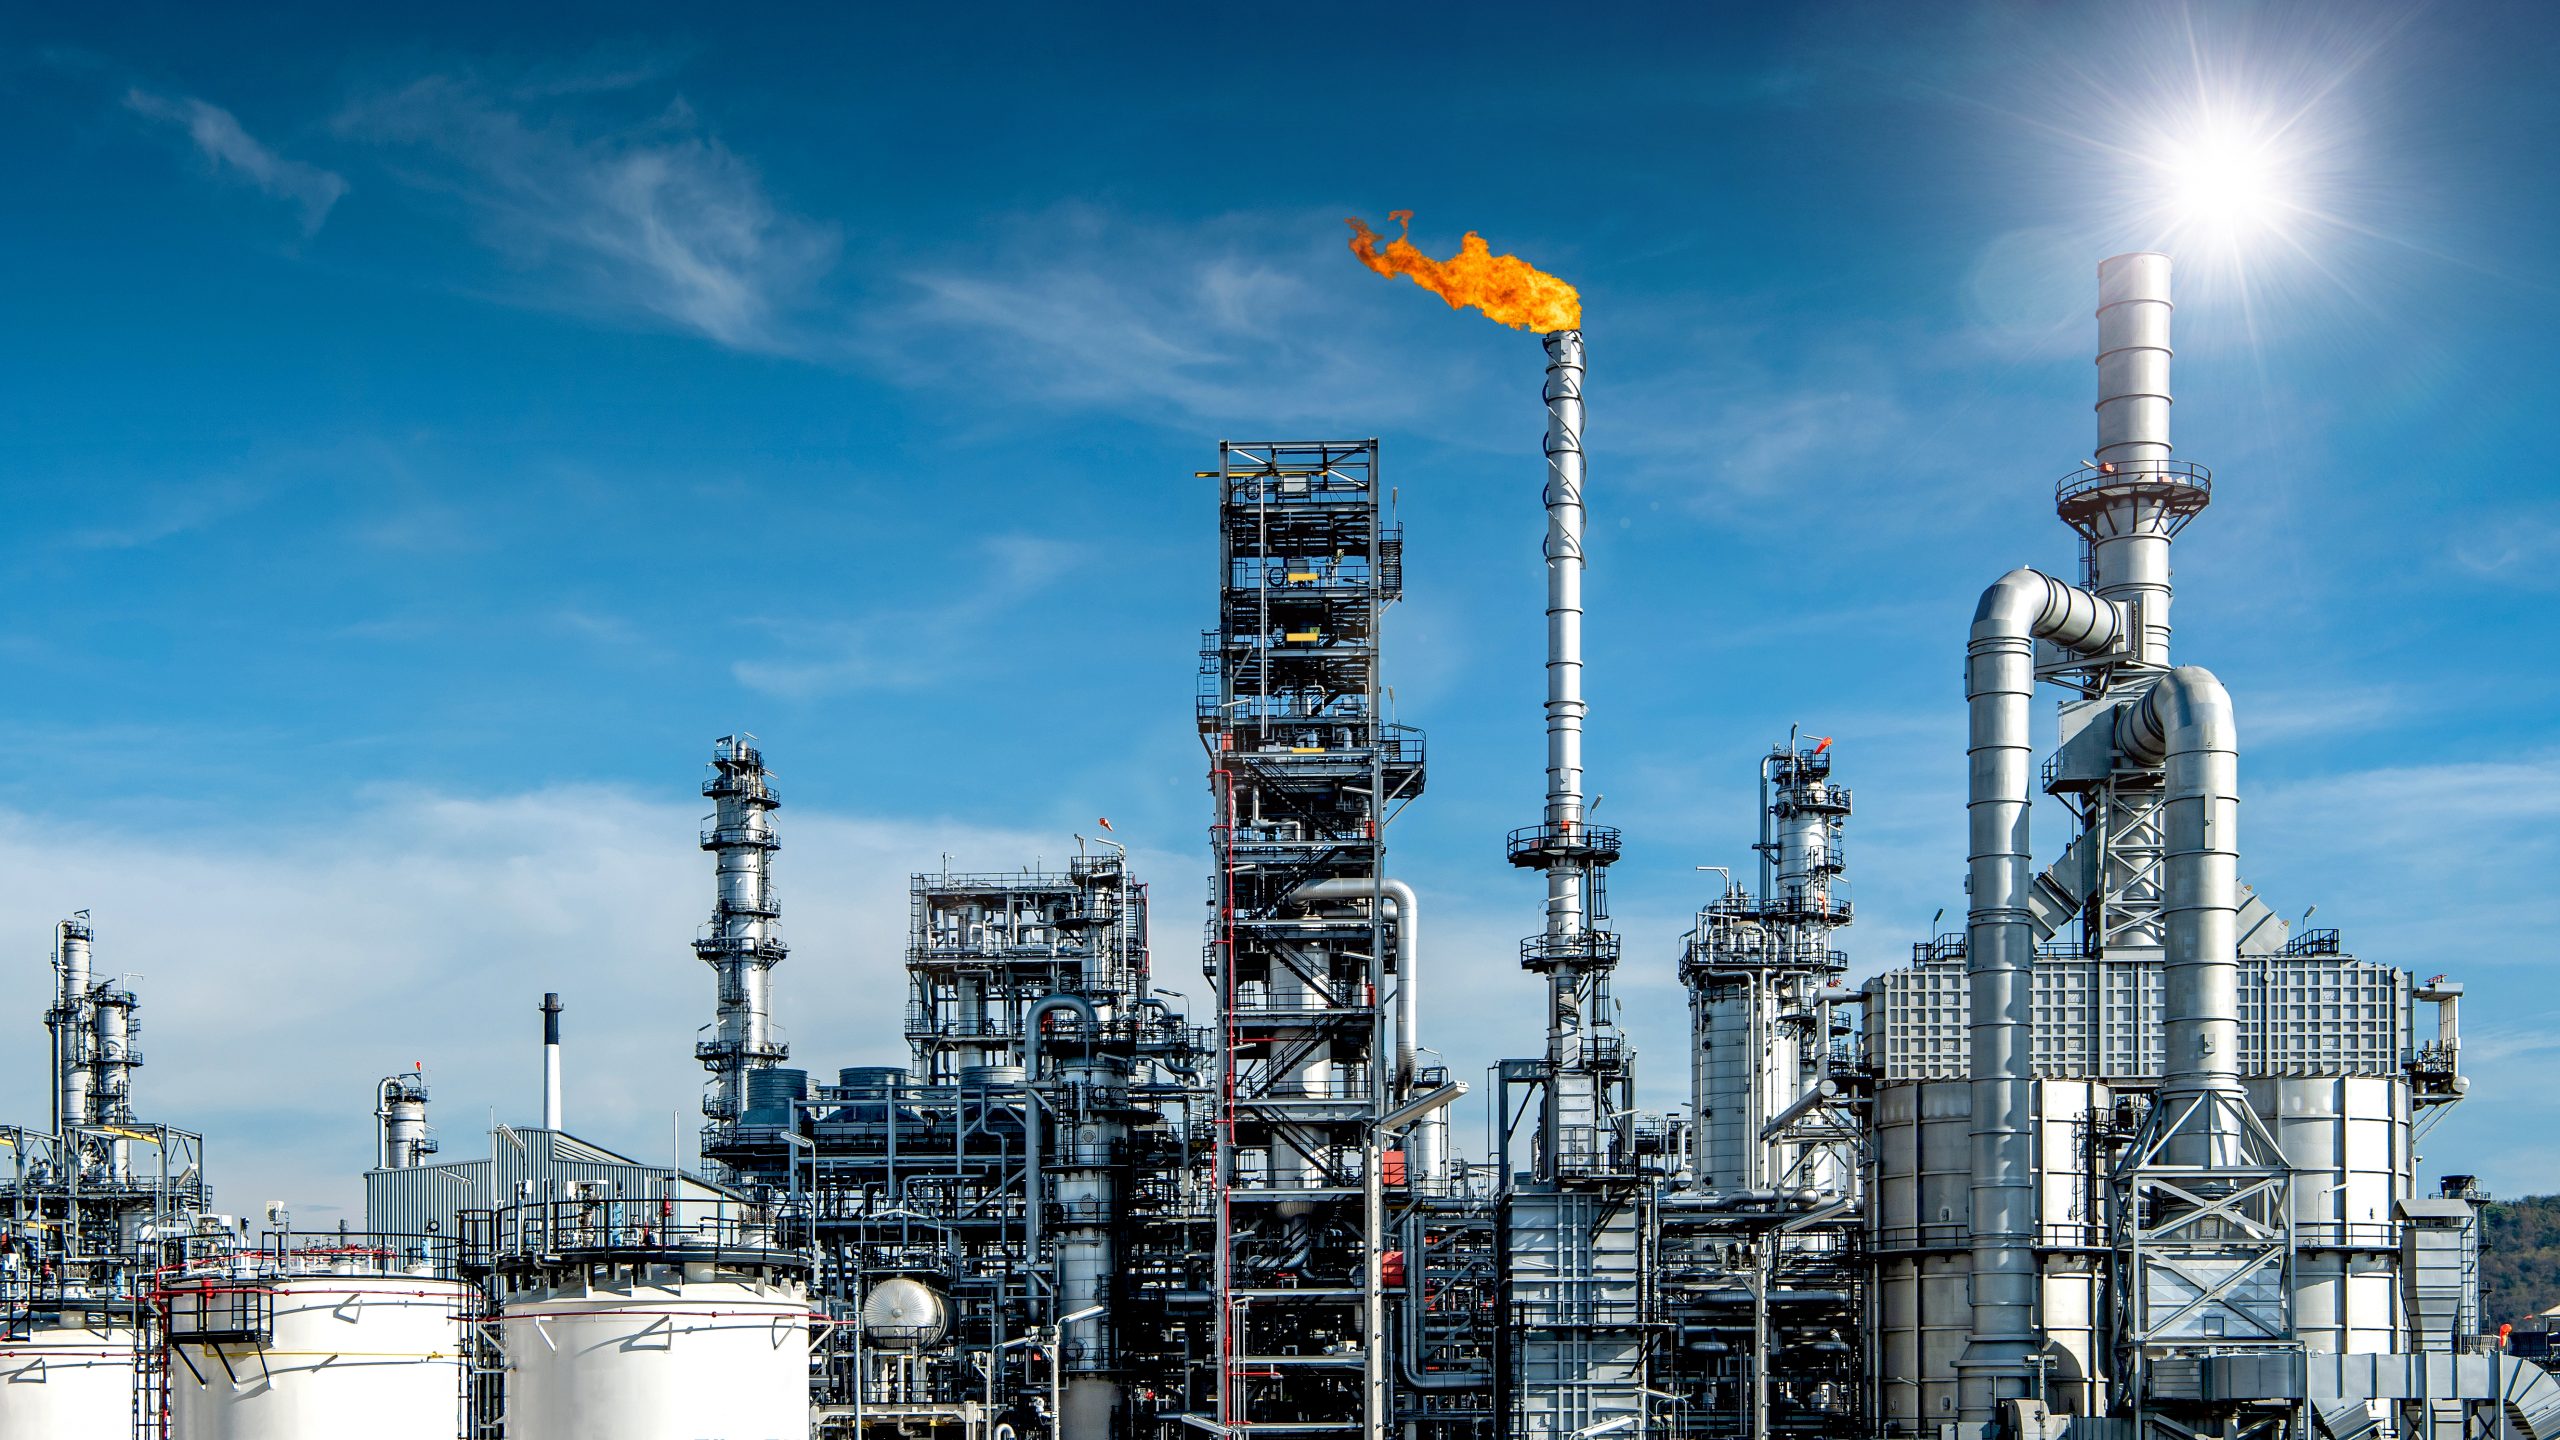 oil-and-gas-industrial-plant